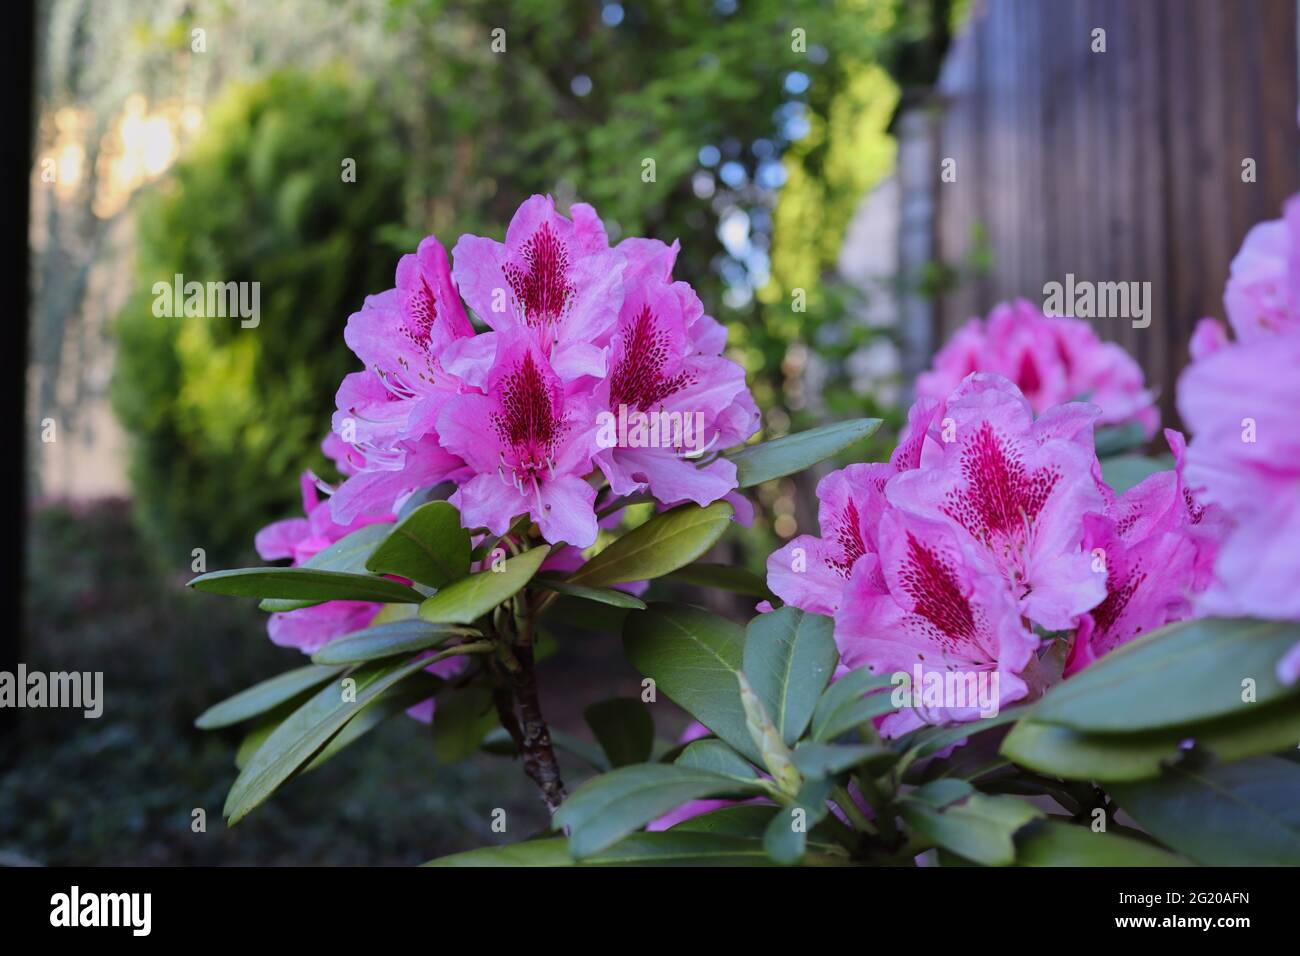 Roztoky, Czech Republic - 22 May, 2021: Pink Rhododendron Flower in the Garden. Catawba Rhododendron belongs to the Family Ericaceae. Stock Photo